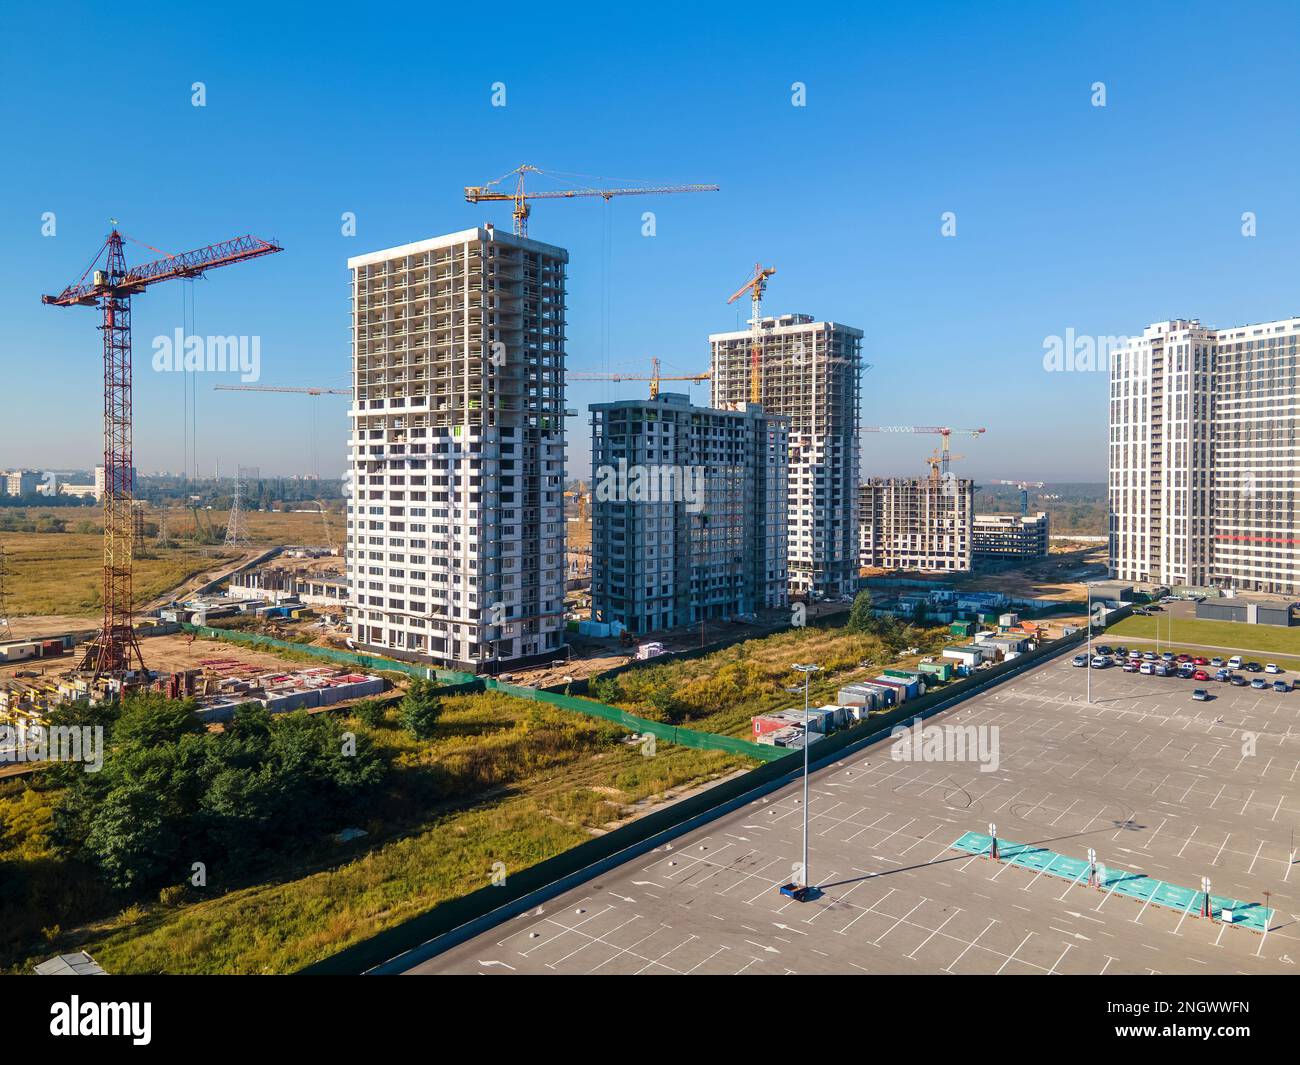 Parking lot and construction site with cranes in a bright sunny day. New real estate development Stock Photo